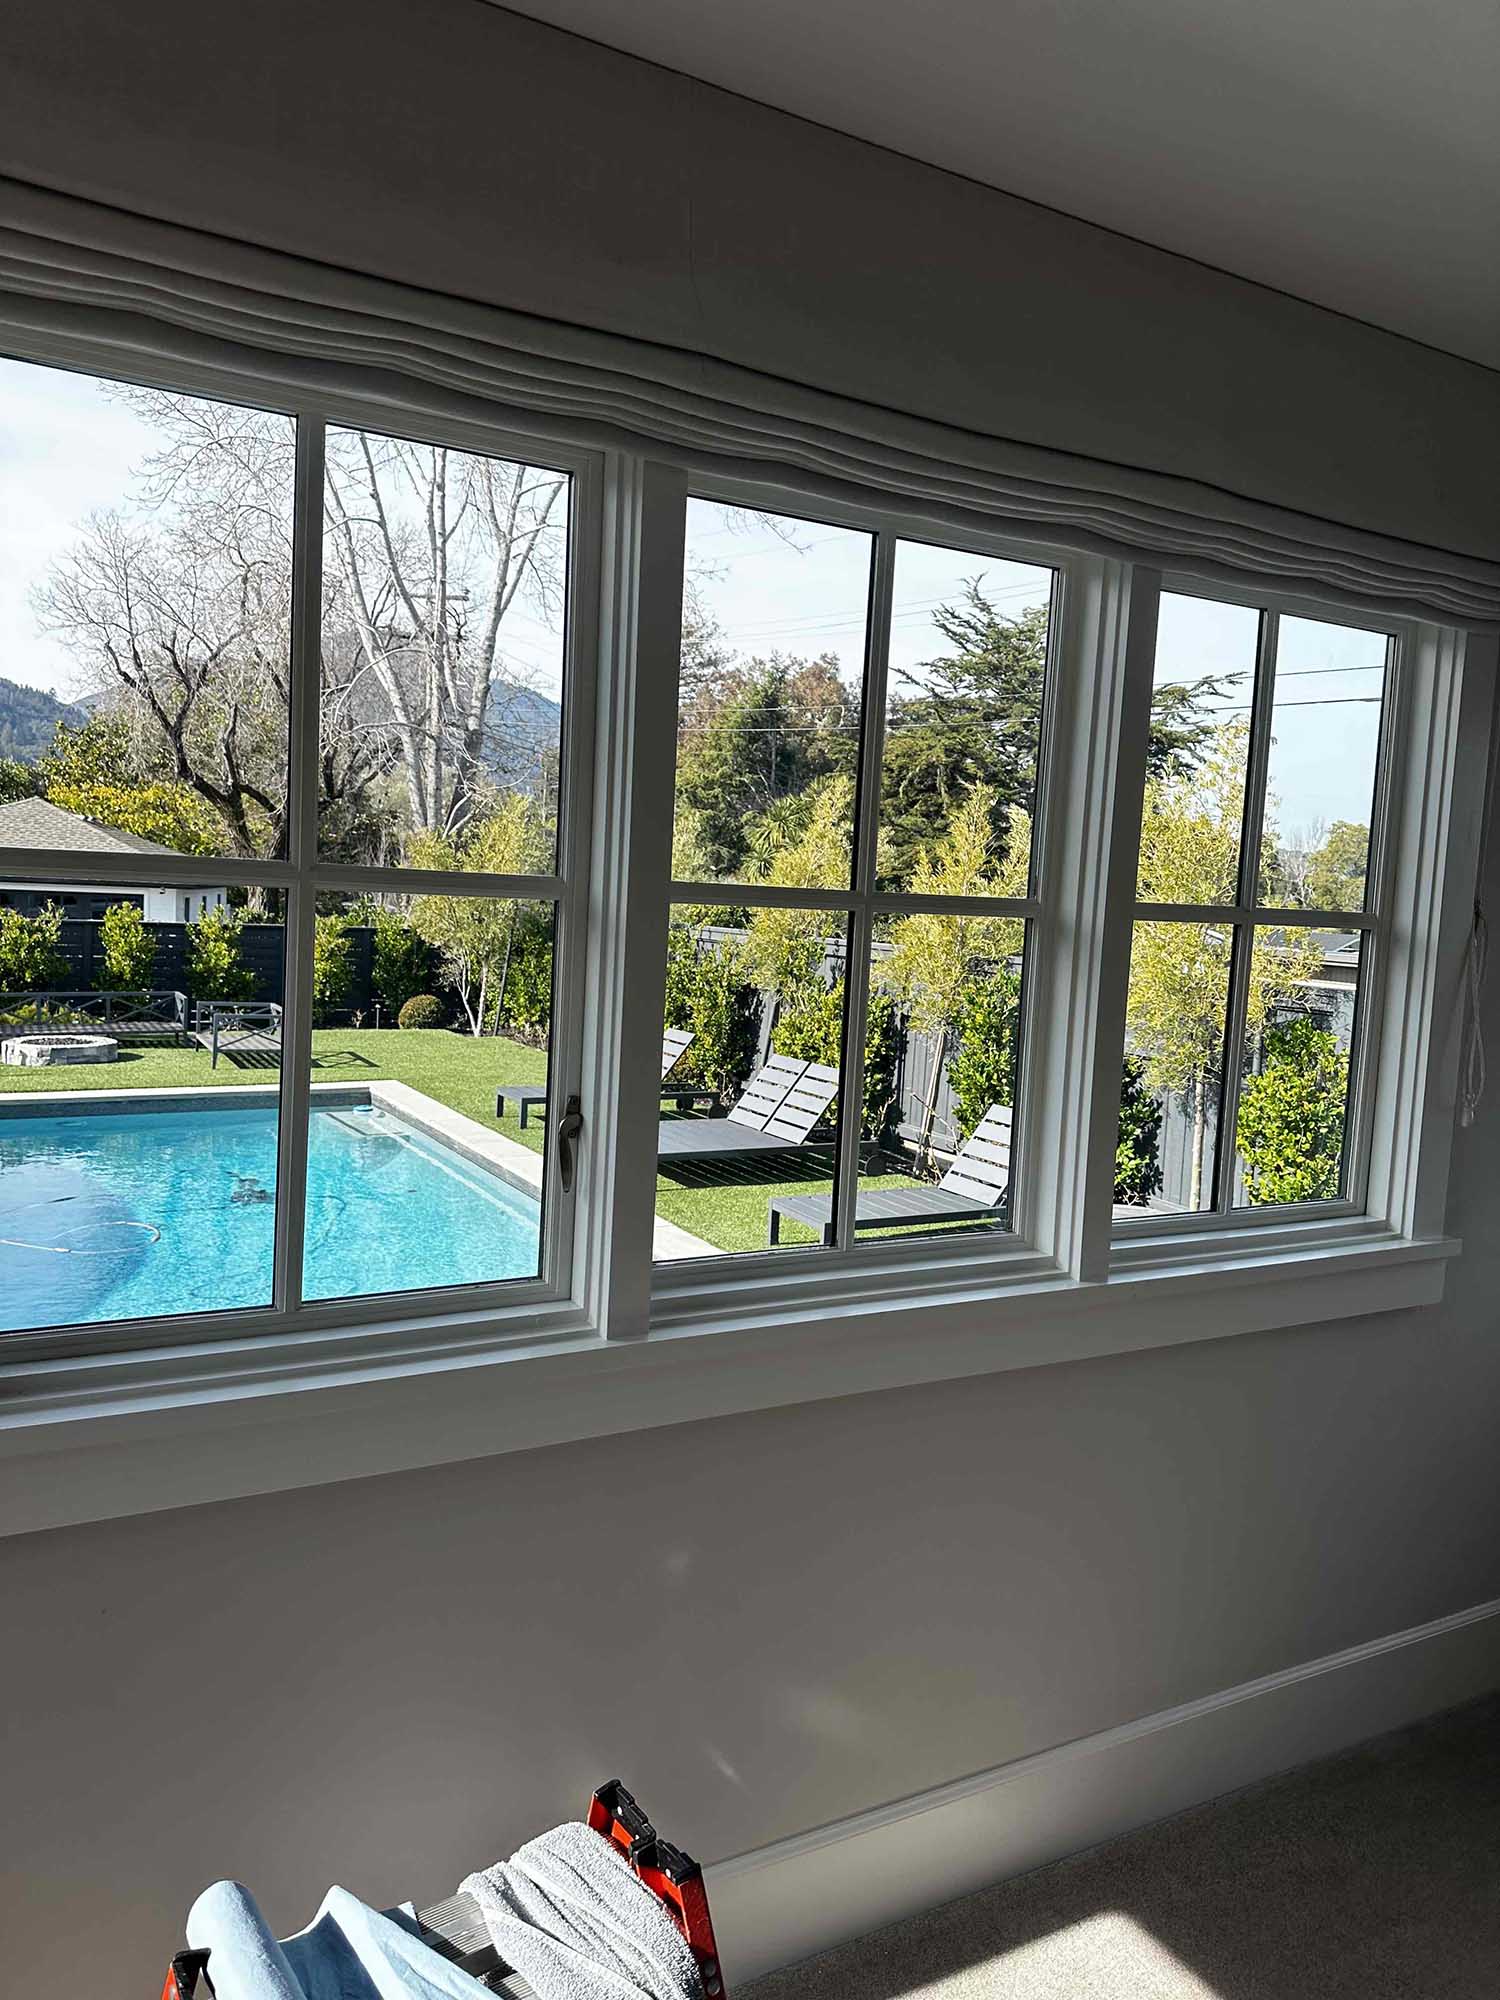 The Best Window Film for Larkspur, CA is the one that works. 3M Prestige Window Film, Installed by ClimatePro